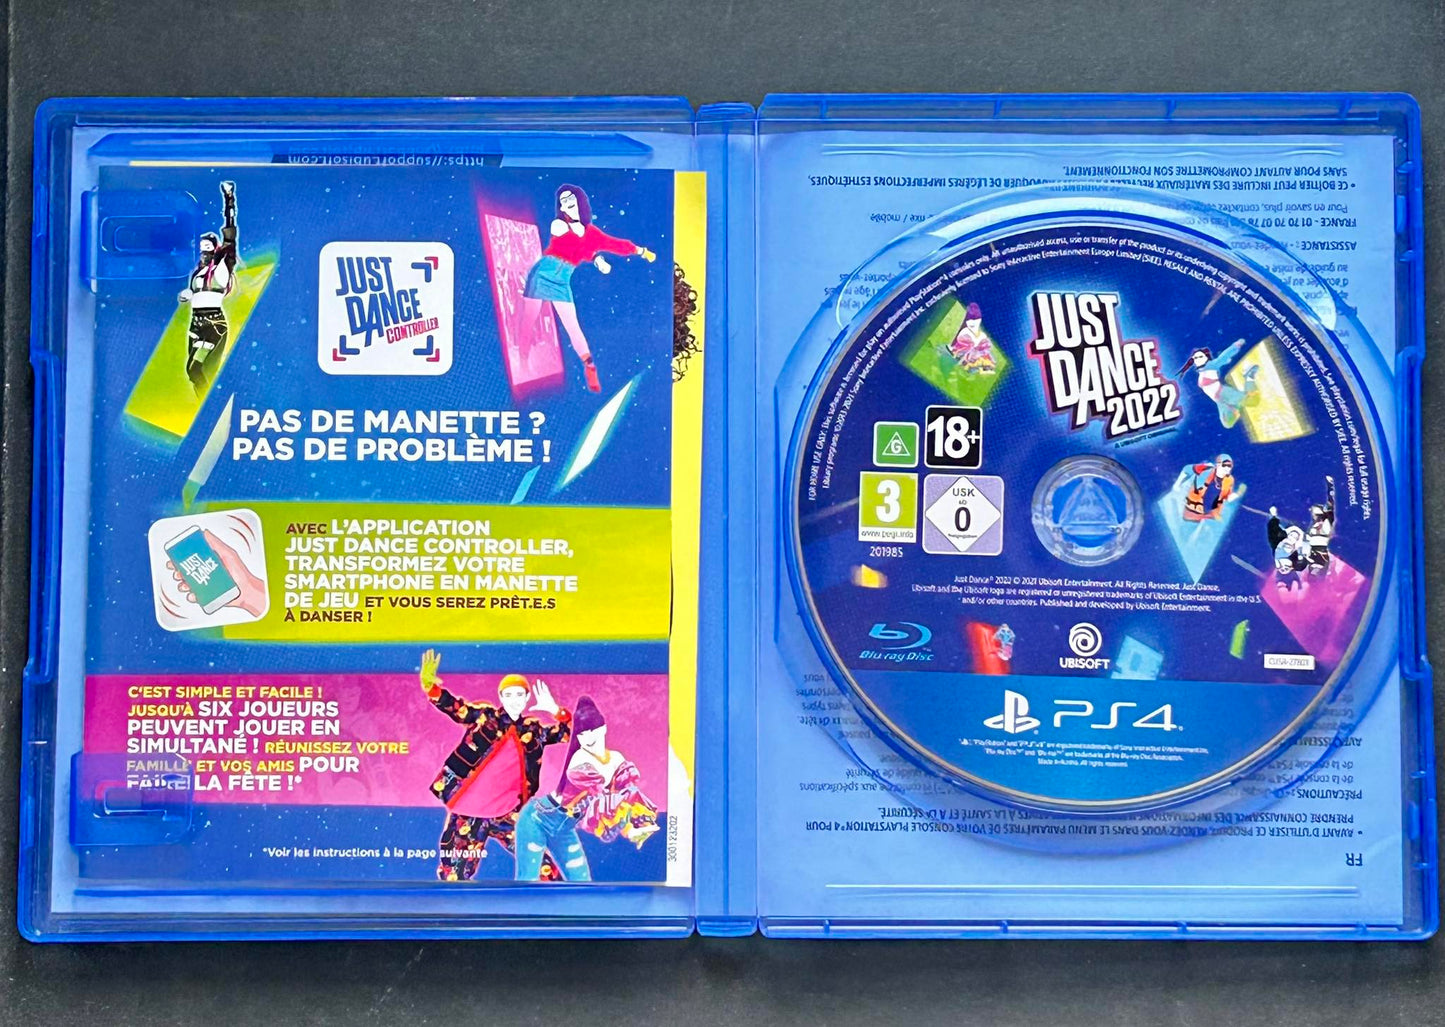 PS4 > Just Dance 2022